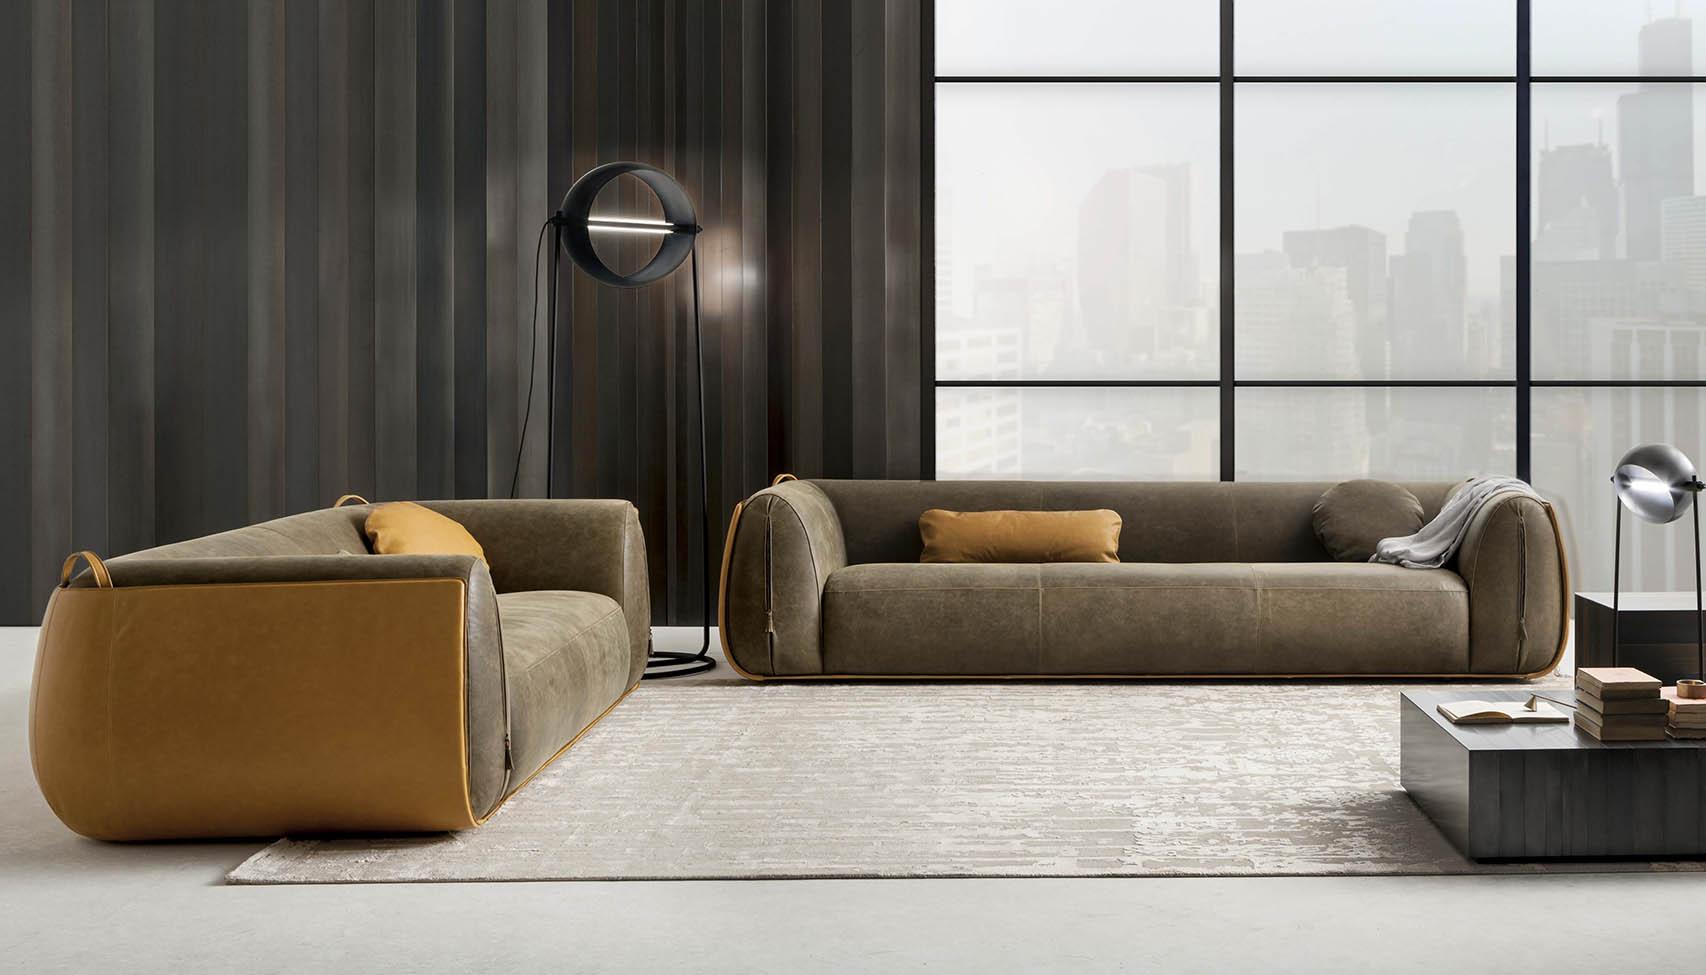 Laurameroni luxury modern sofa in precious leather for a made to measure livingroom interior design and decor